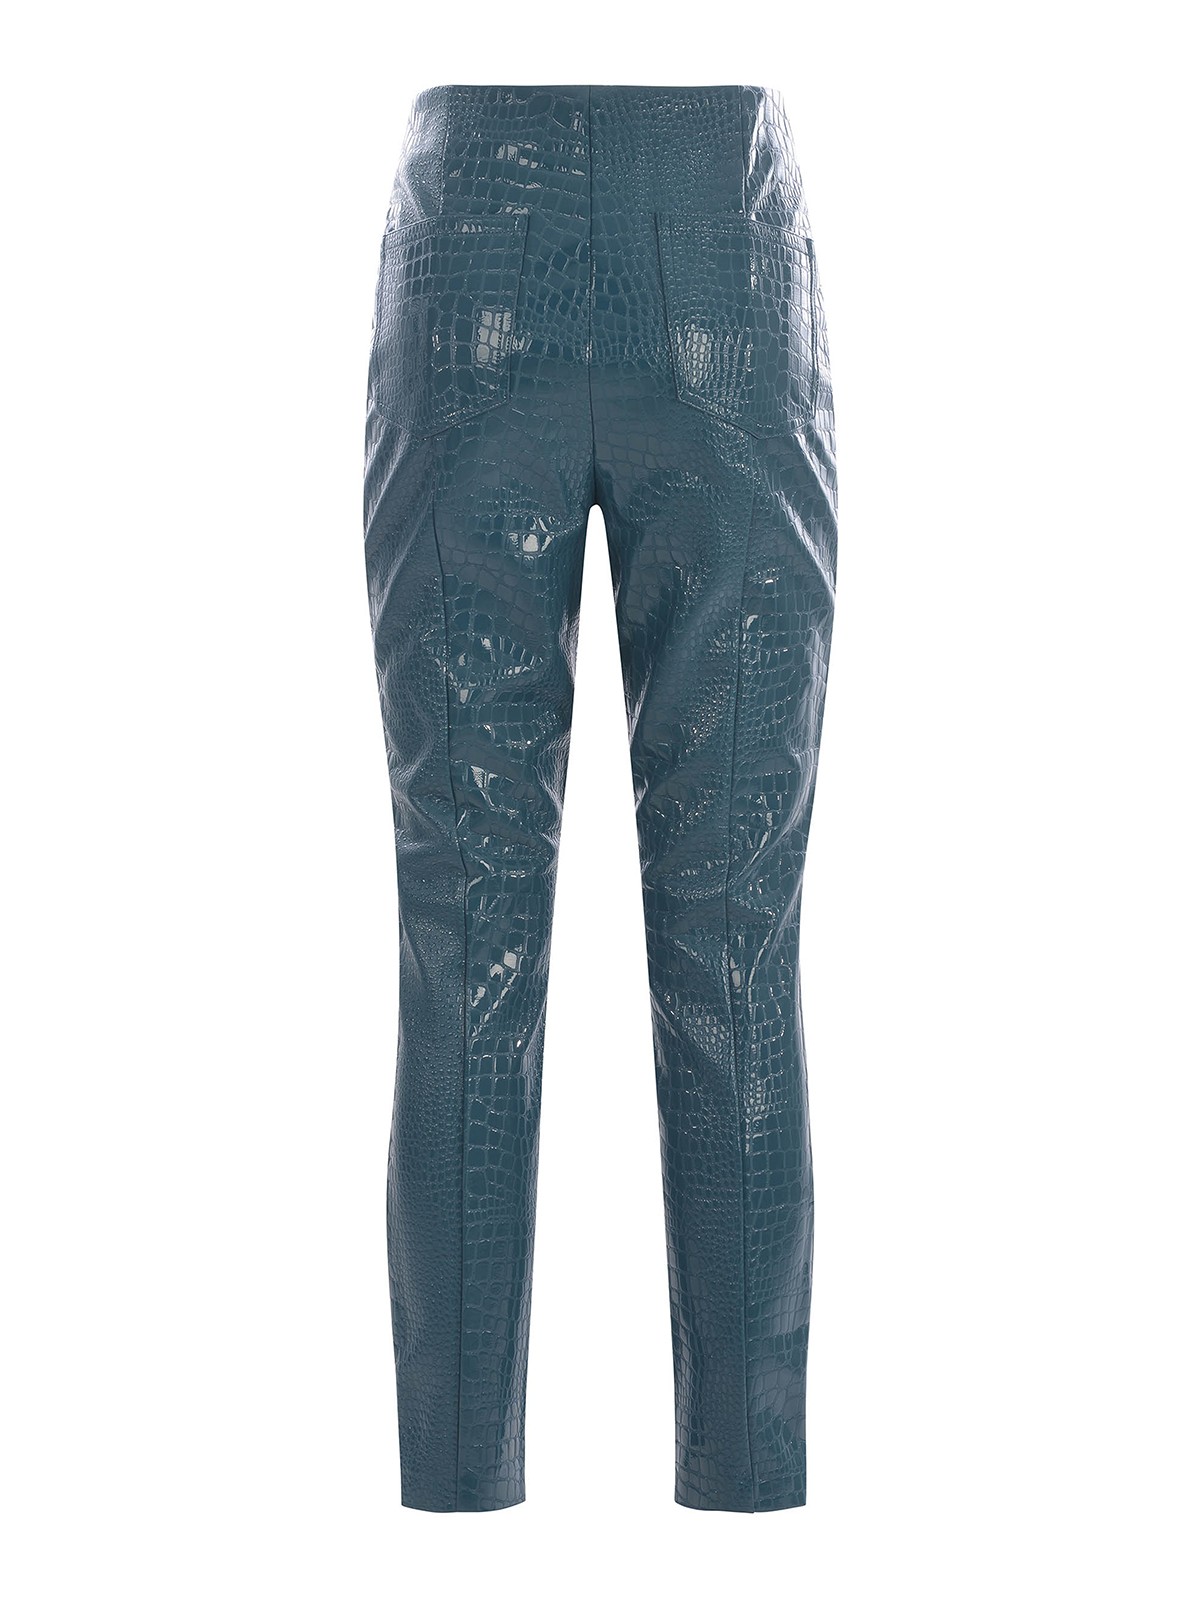 Shop Rotate Birger Christensen Trousers Rotate Faux Leather In Blue